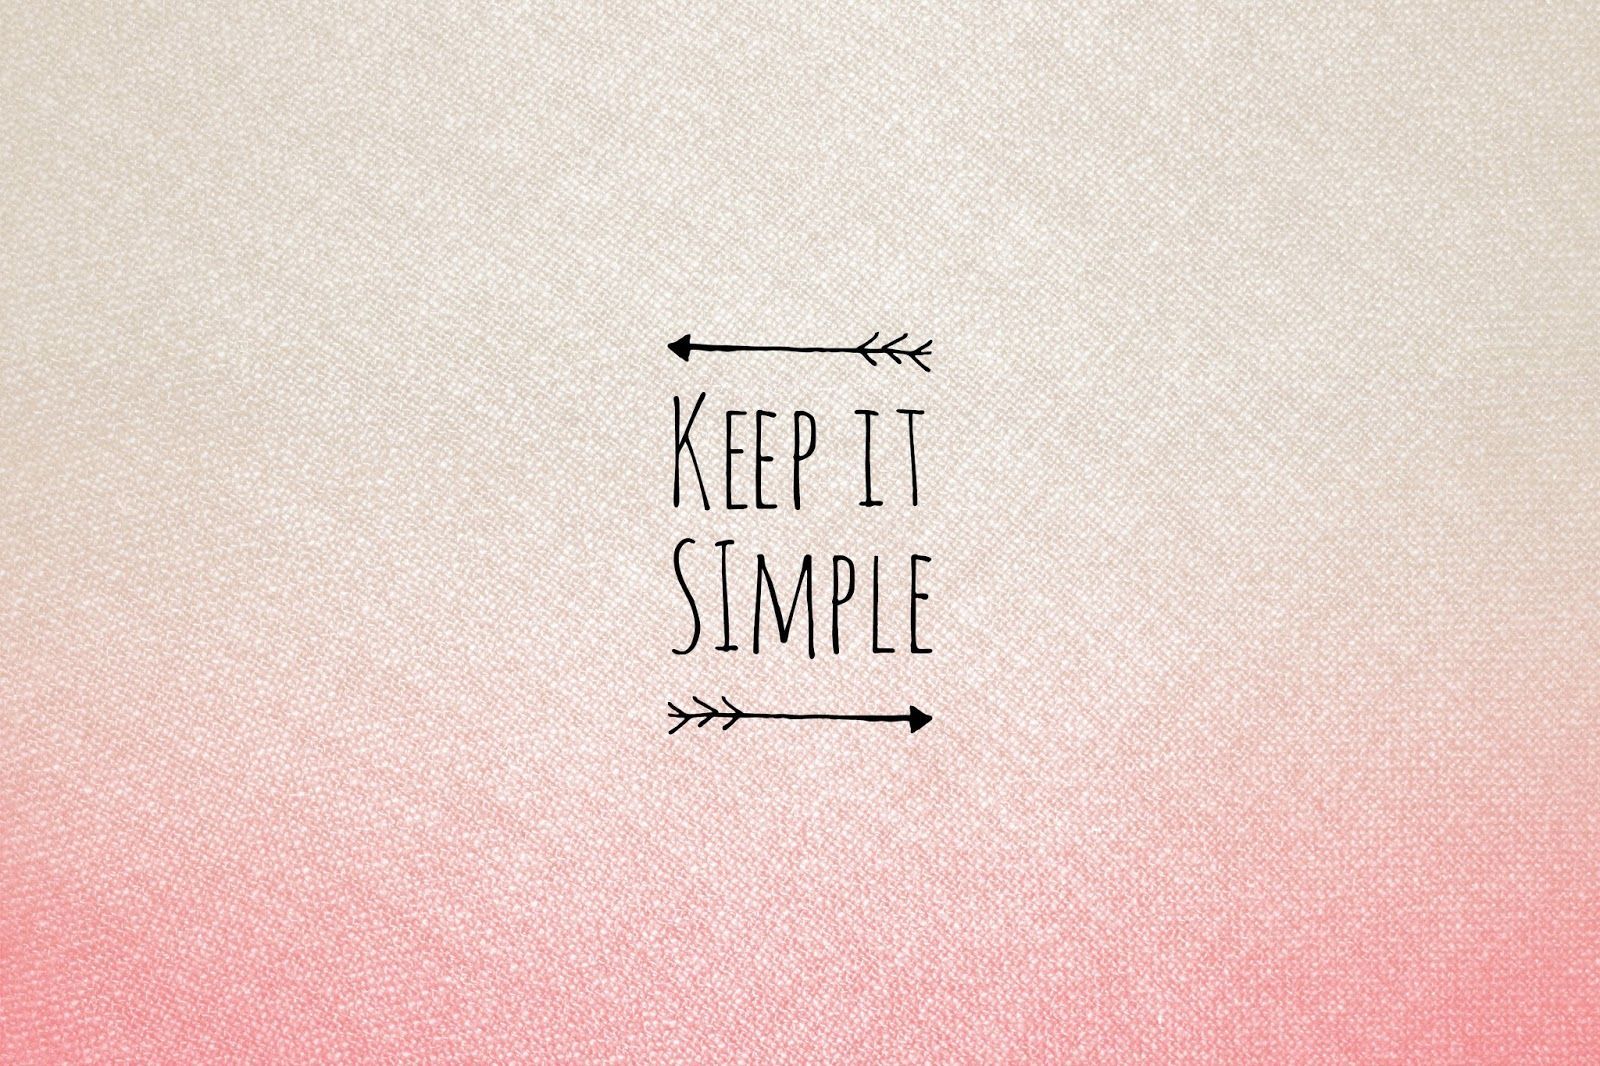 Free keep it simple Wallpaper. Curly Made. Simple wallpaper, Keep it simple, Simple quotes